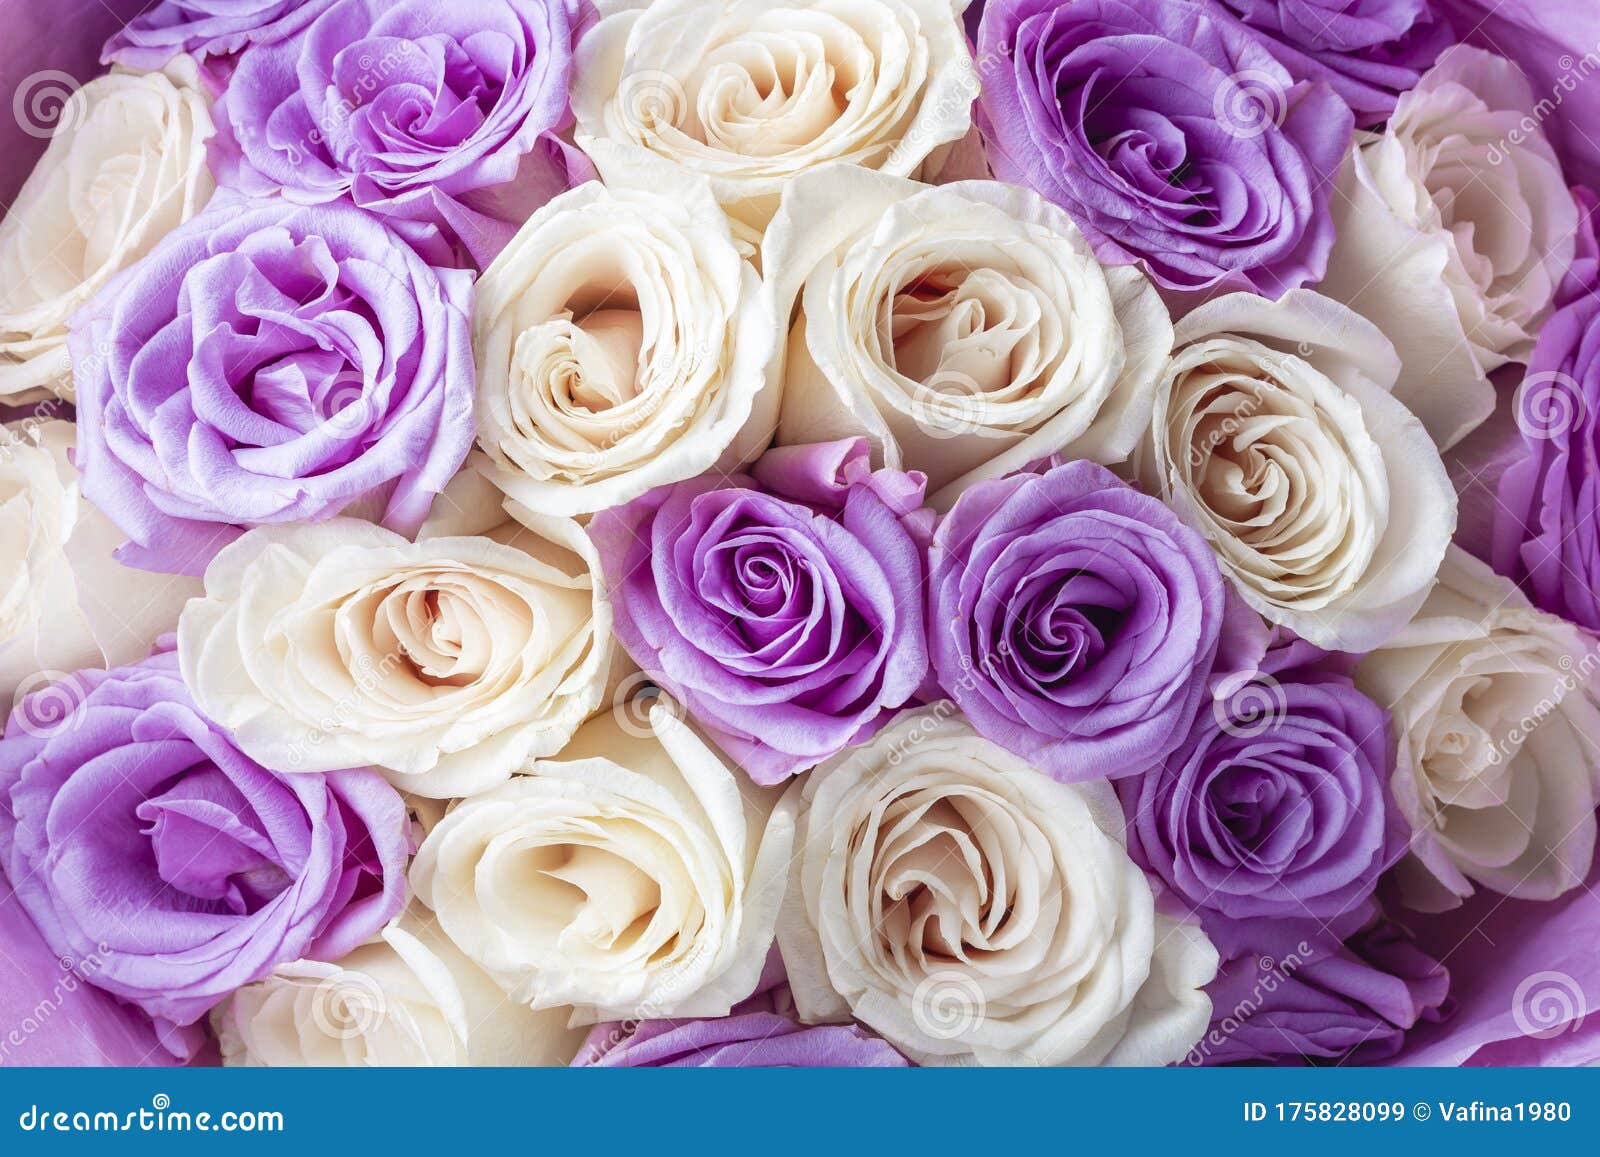 Natural Background of Fresh Amazing White and Purple Roses for ...